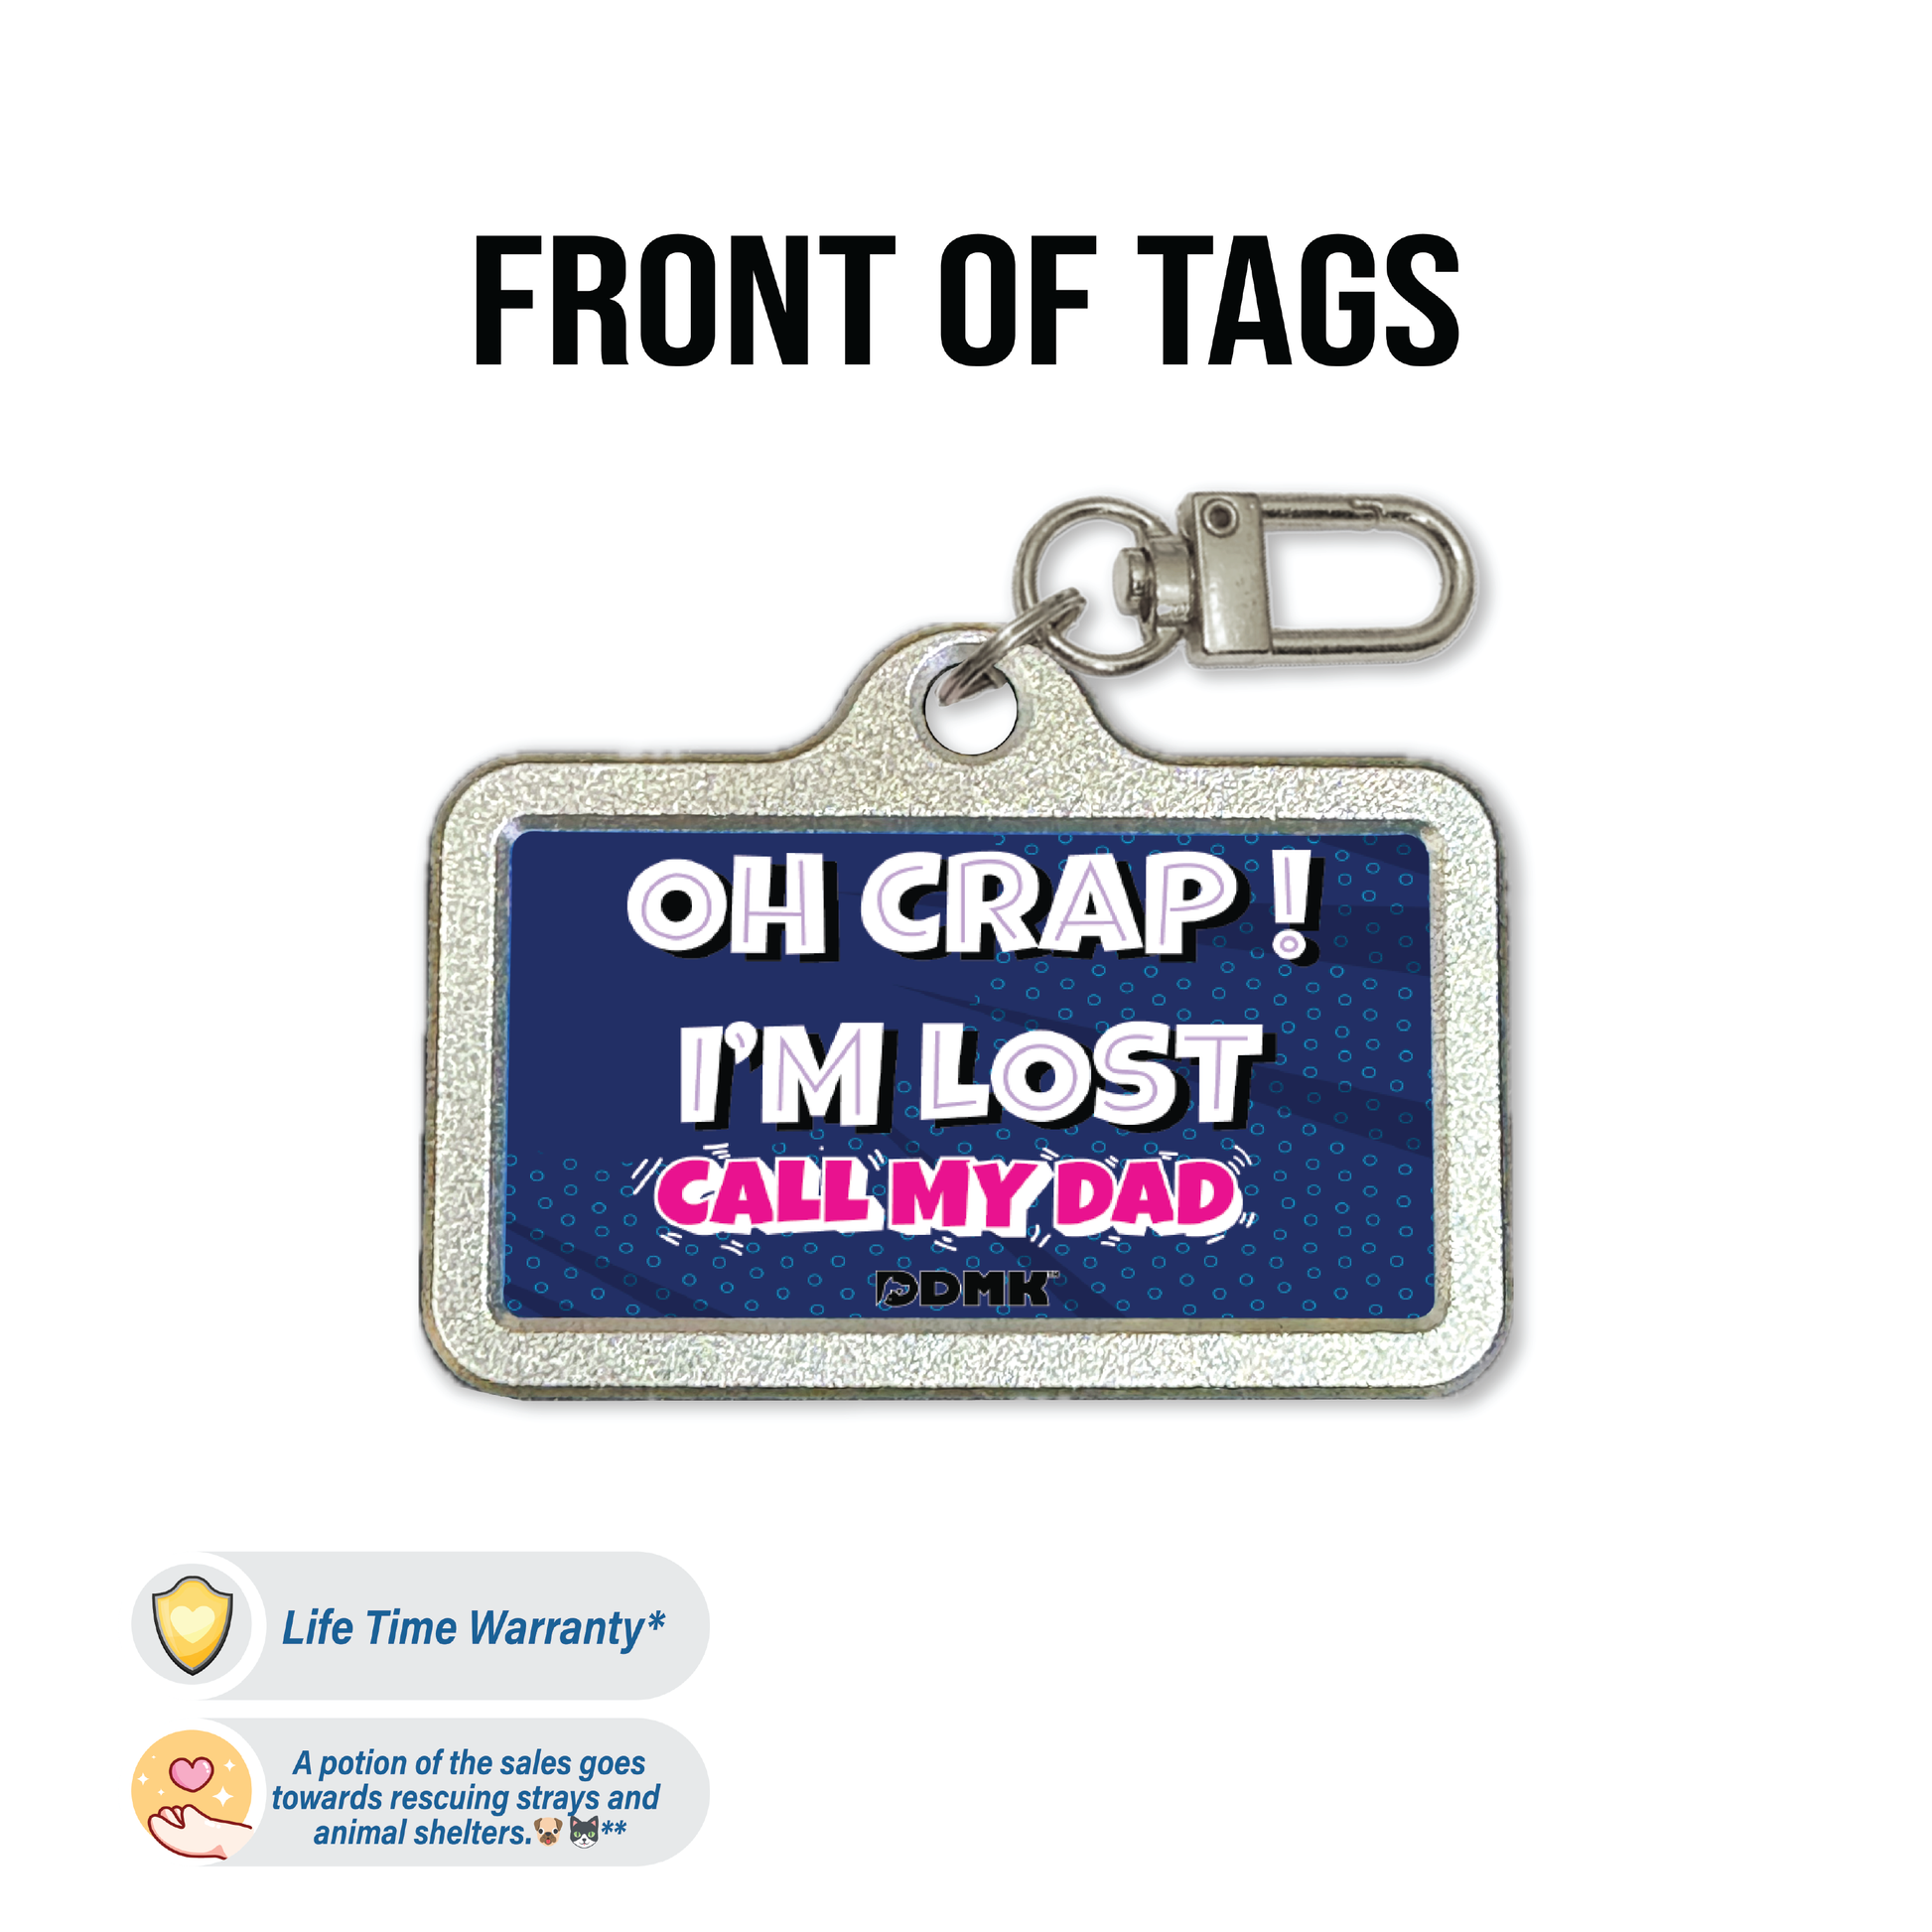 DDMK™ Tags for LOVE™- Oh Crap! I'm Lost Call My Dad